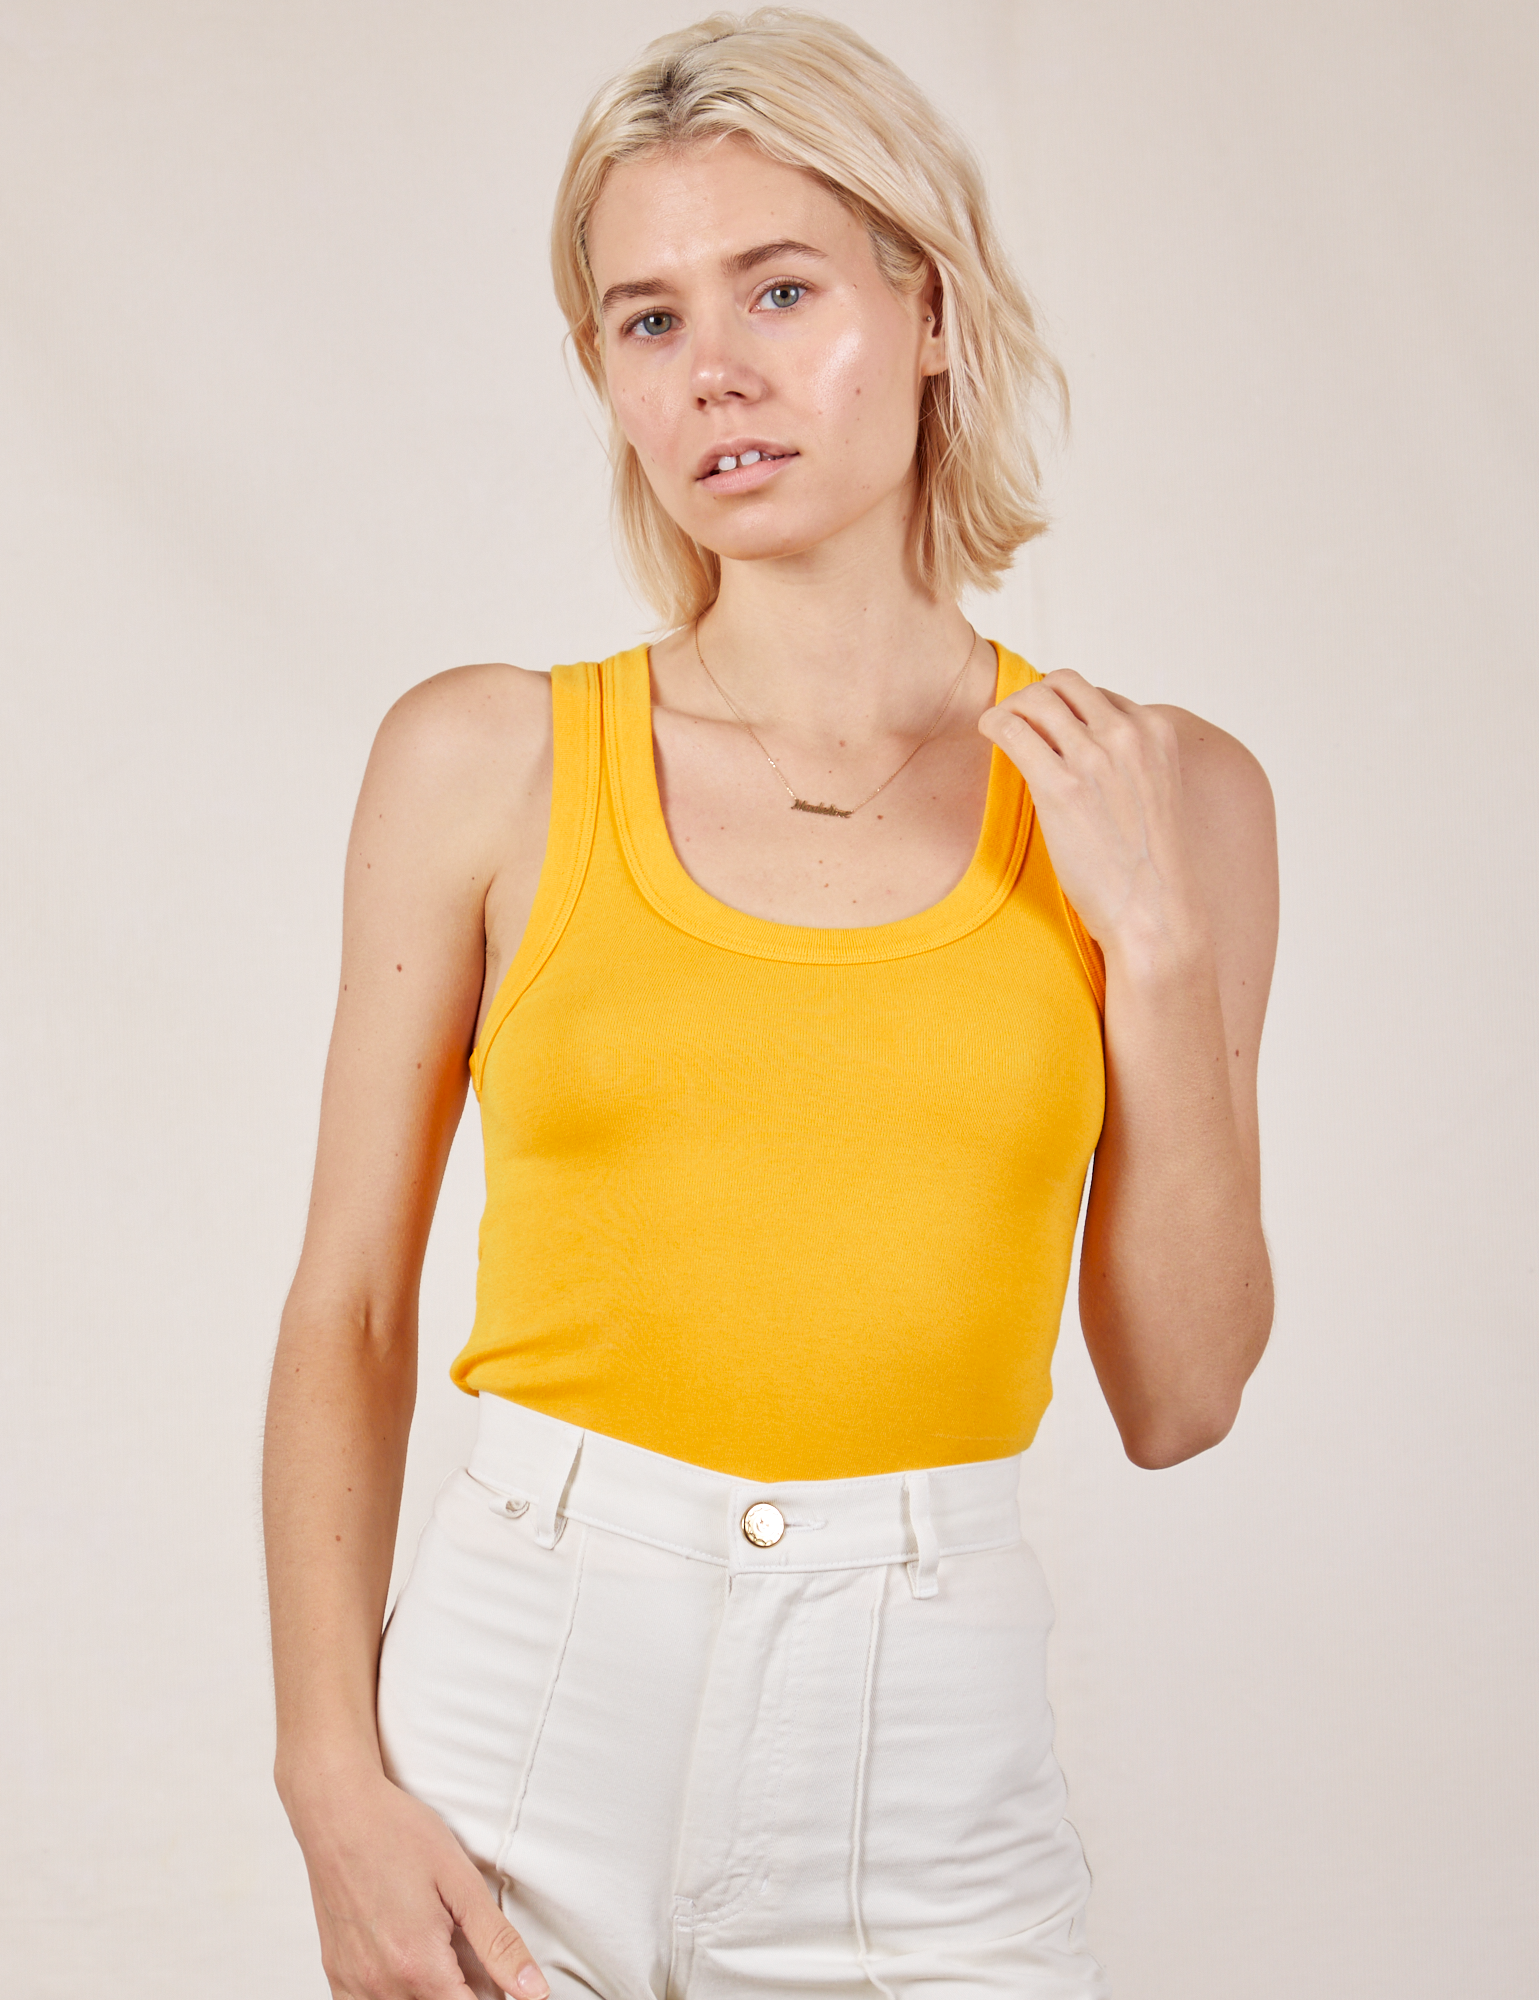 Madeline is wearing Tank Top in Sunshine Yellow